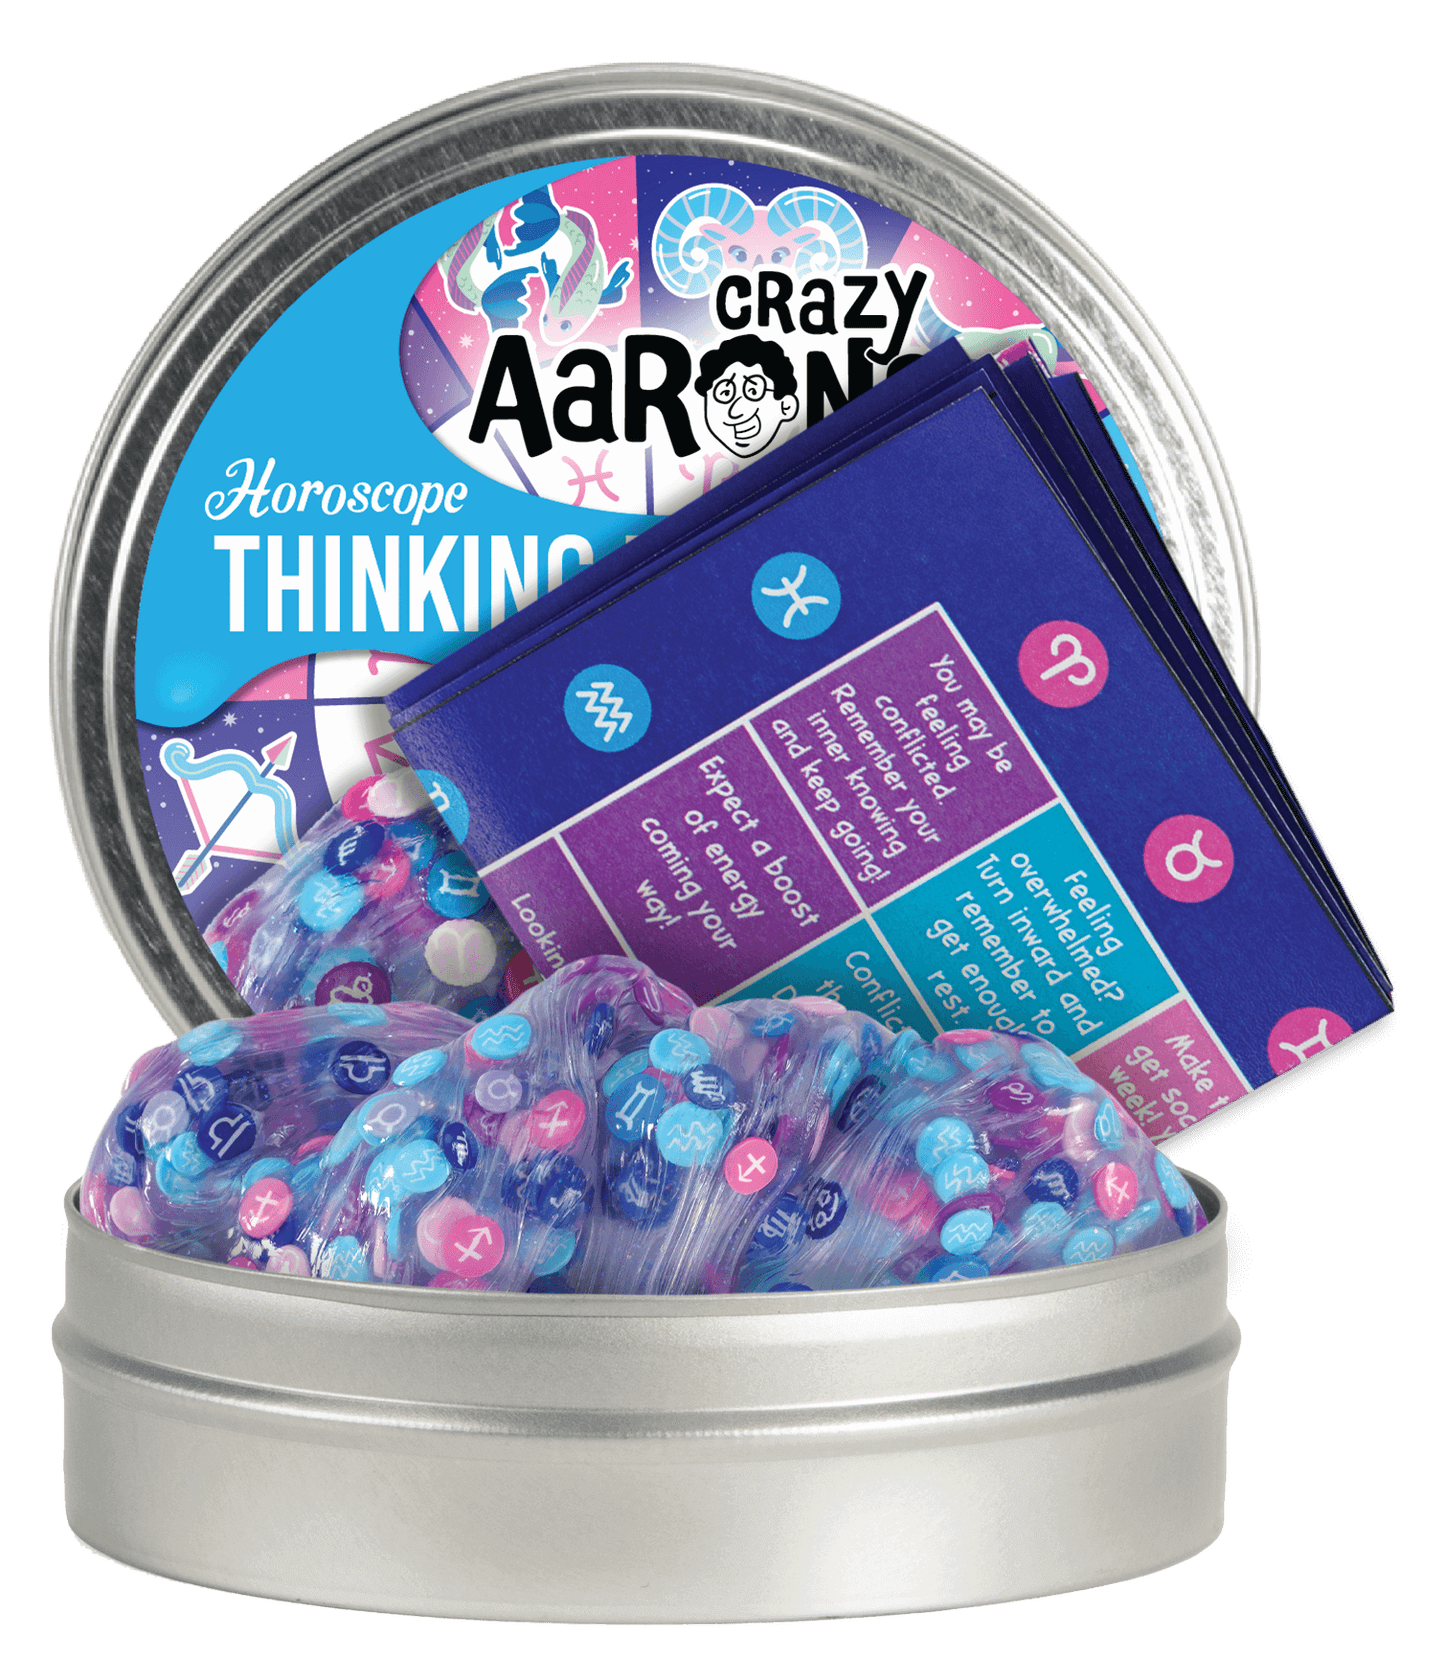 Horoscope Putty, Crazy Aarons Thinking Putty, eco-friendly Toys, Mountain Kids Toys